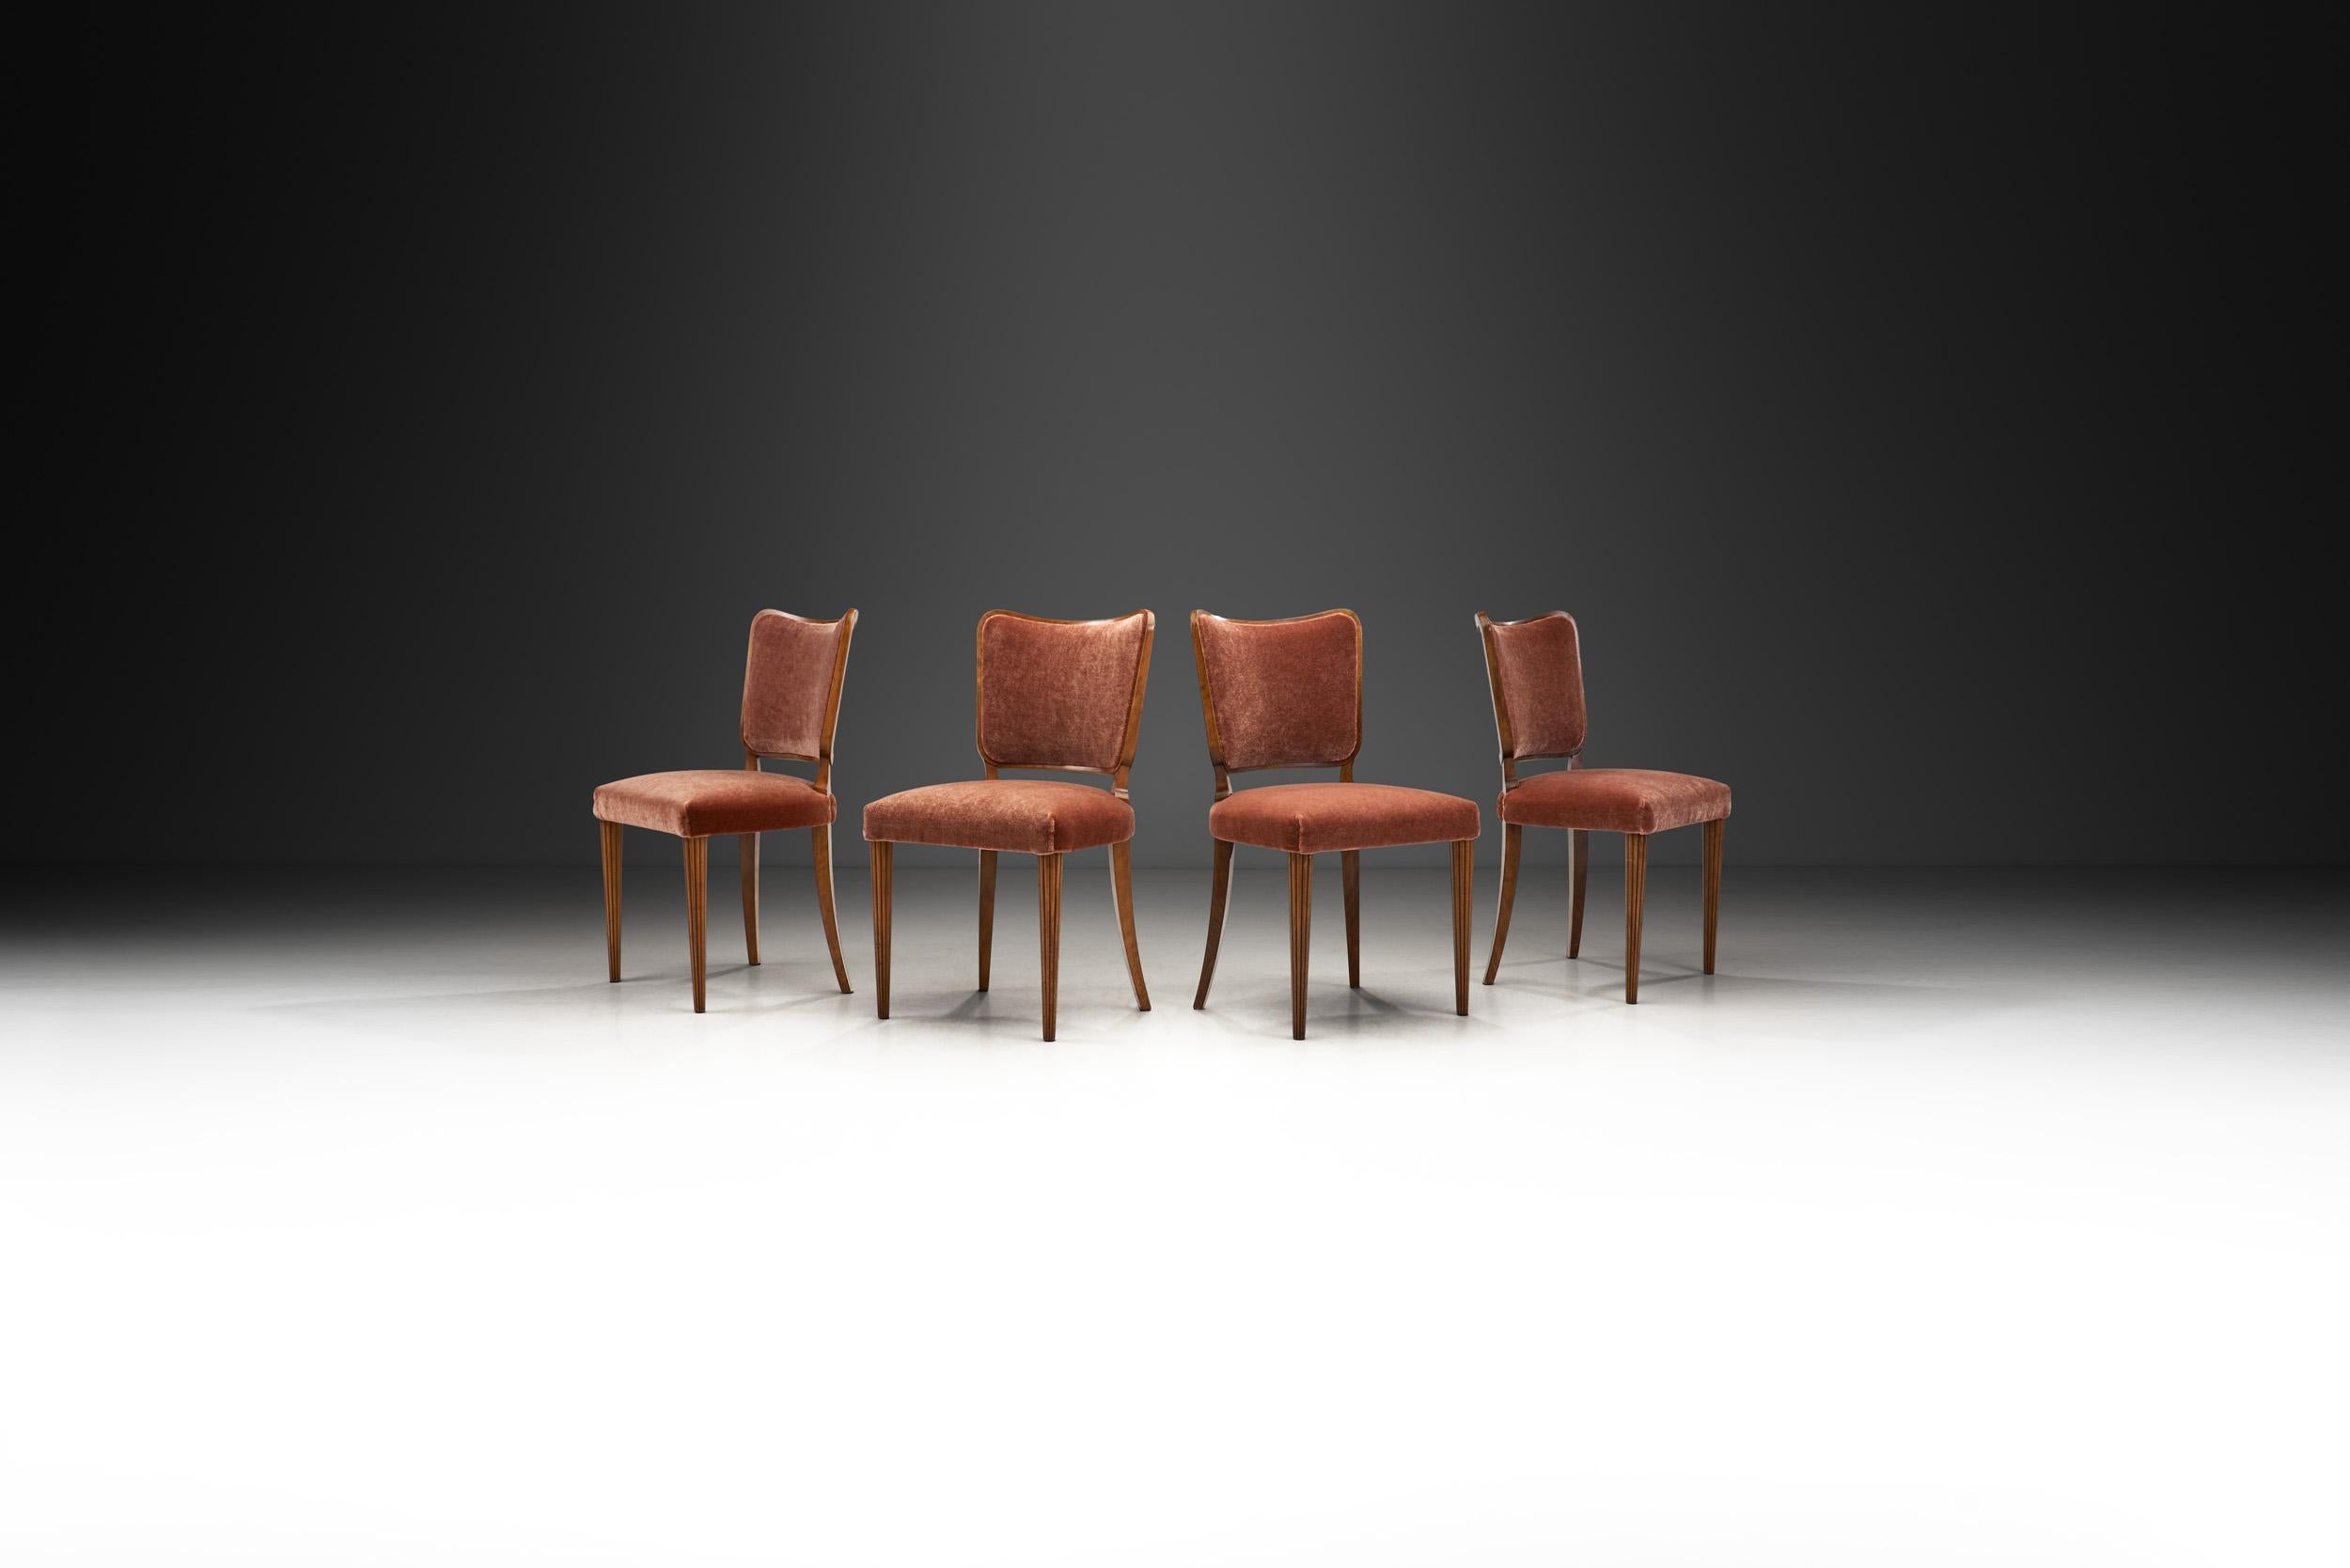 The work of Swedish Modern designers and cabinetmakers - like this set of dining chairs - remains disarmingly fresh over 80 years after their creation, mixing both Art Deco and Modernist influences, a sense of sophistication with something purely